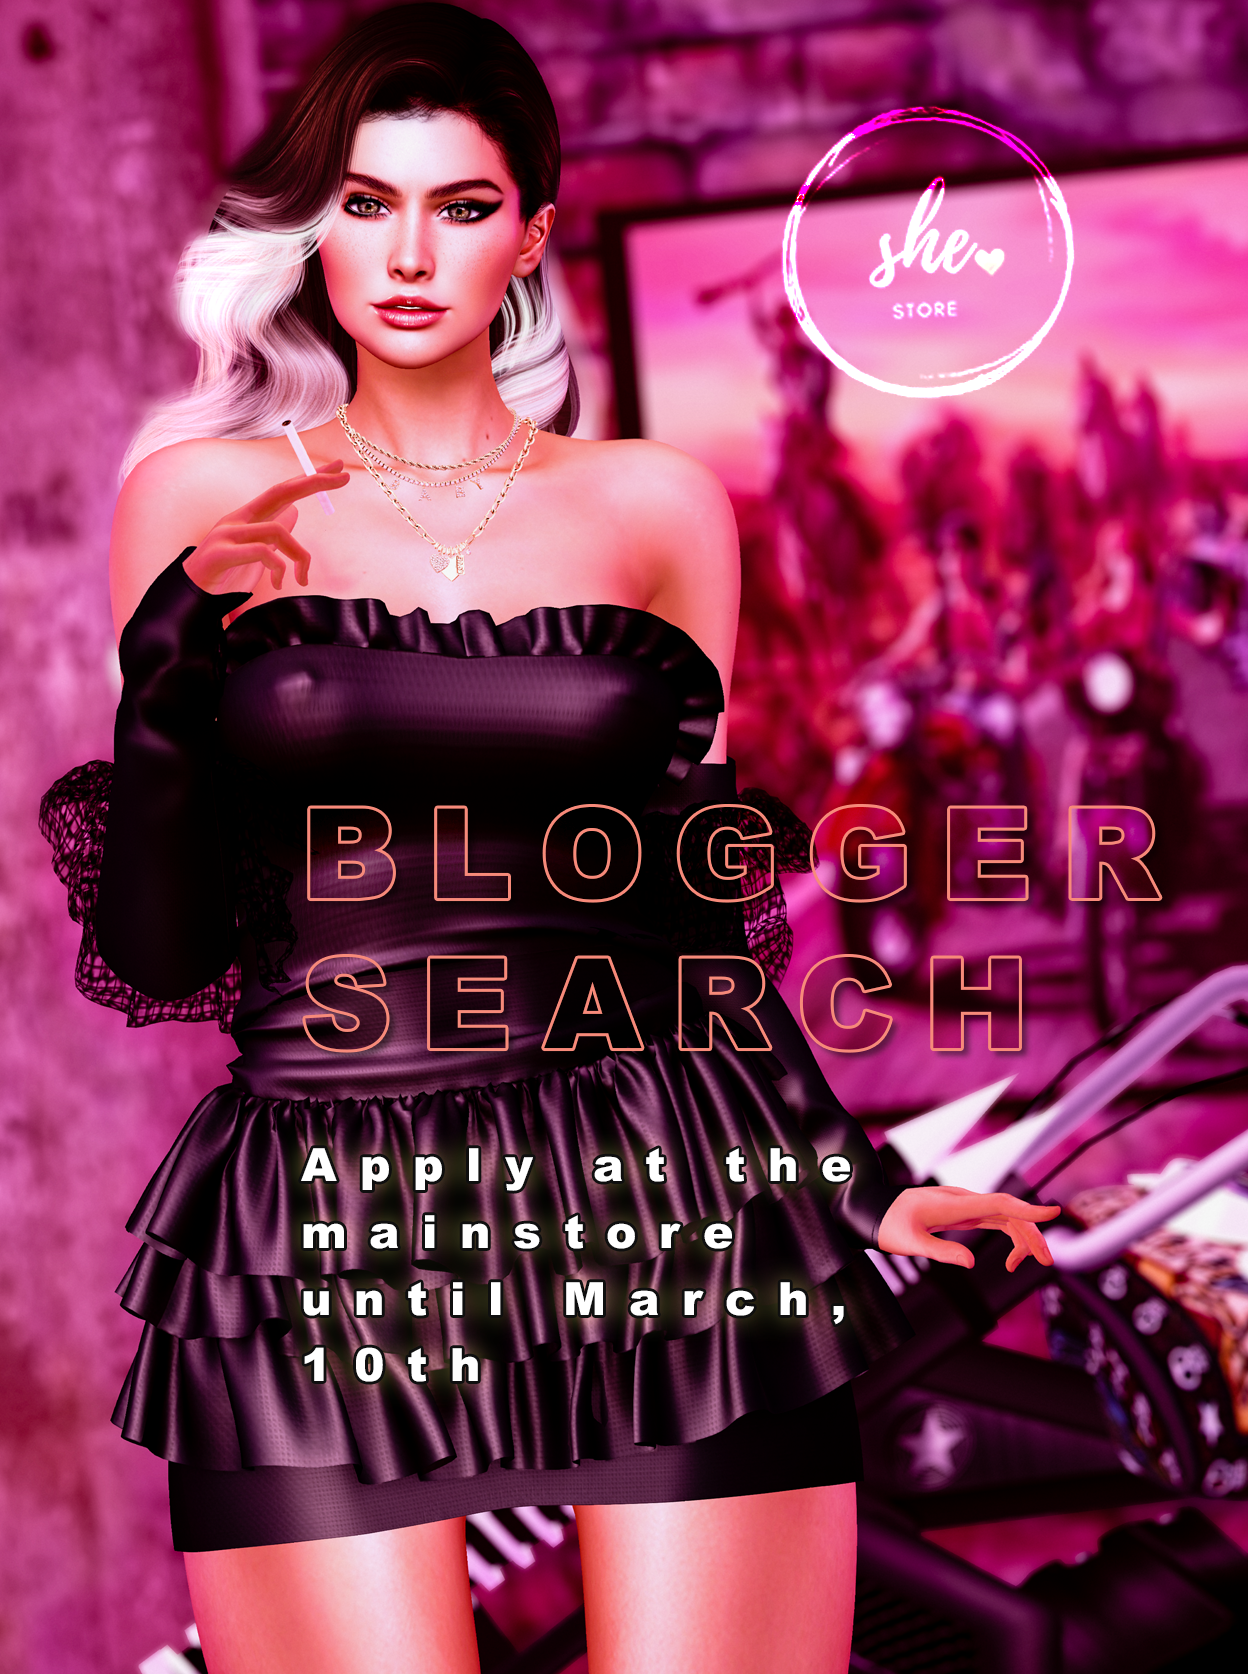 Bloggers wanted: She.